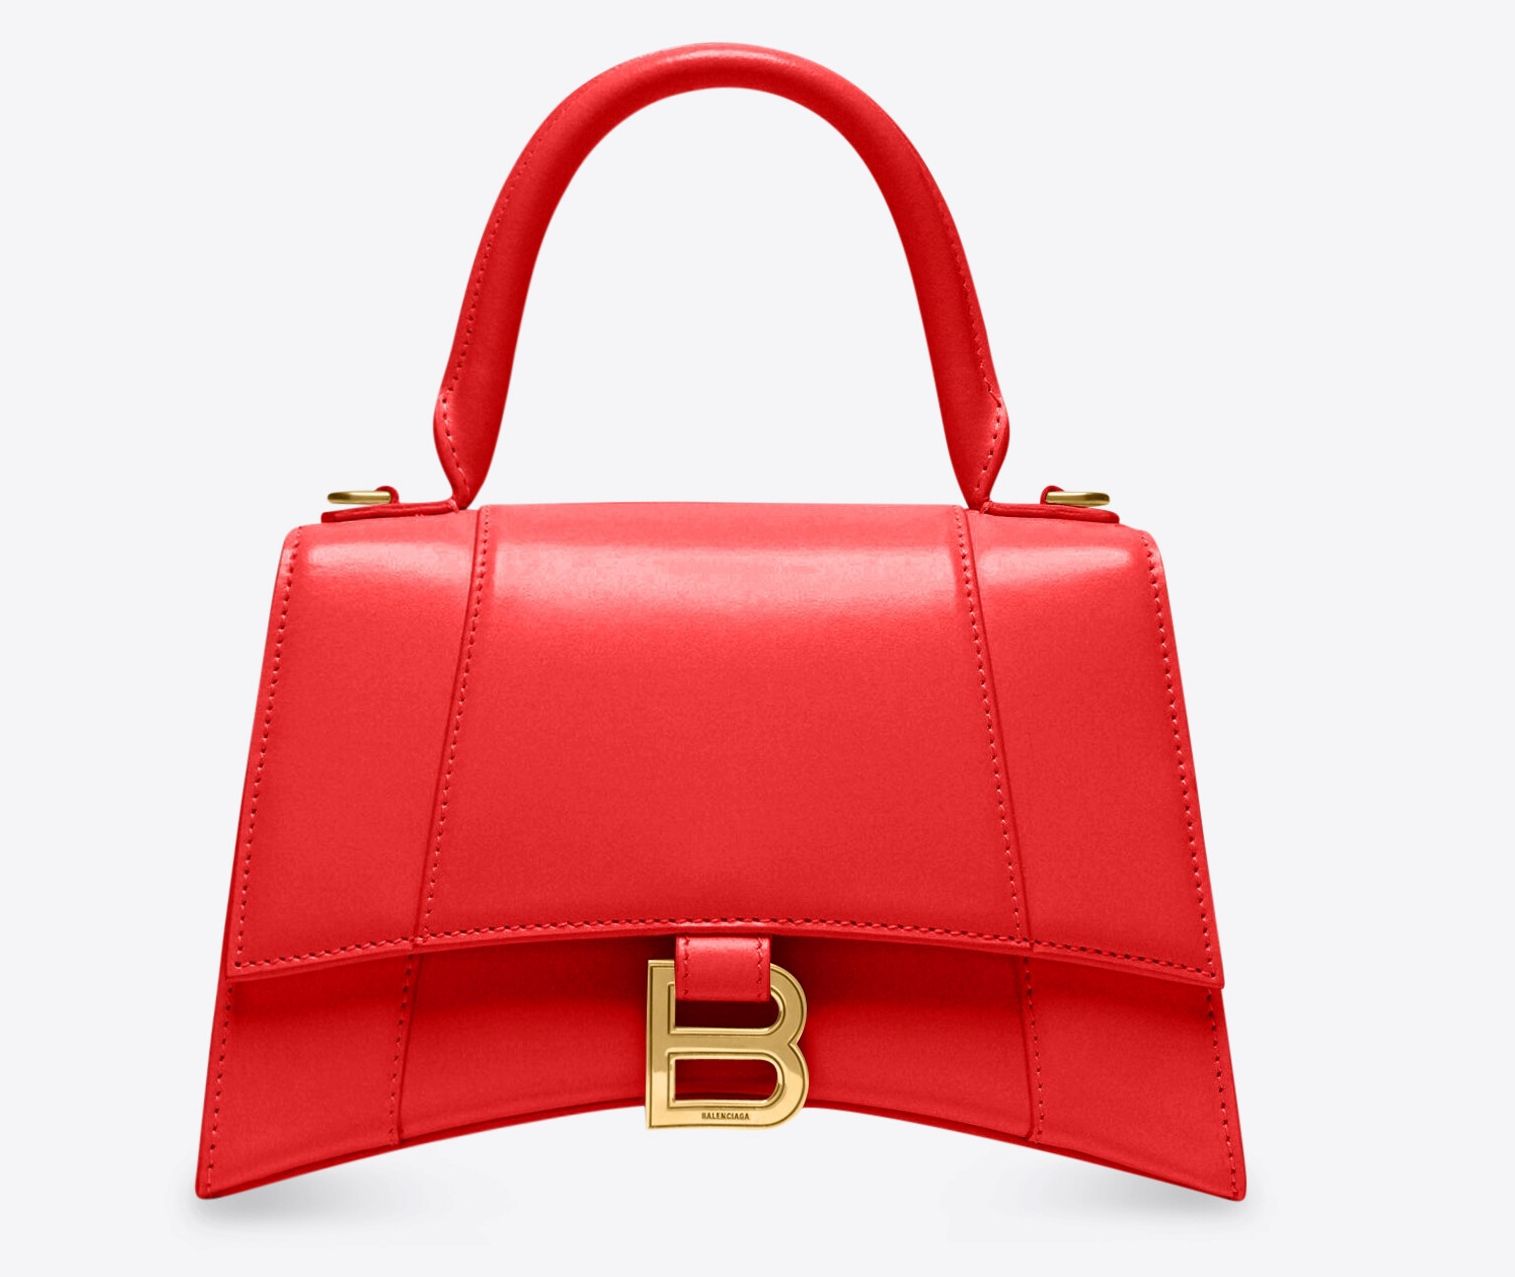 Balenciaga hourglass bag dupes from 15  SURGEOFSTYLE by Benita